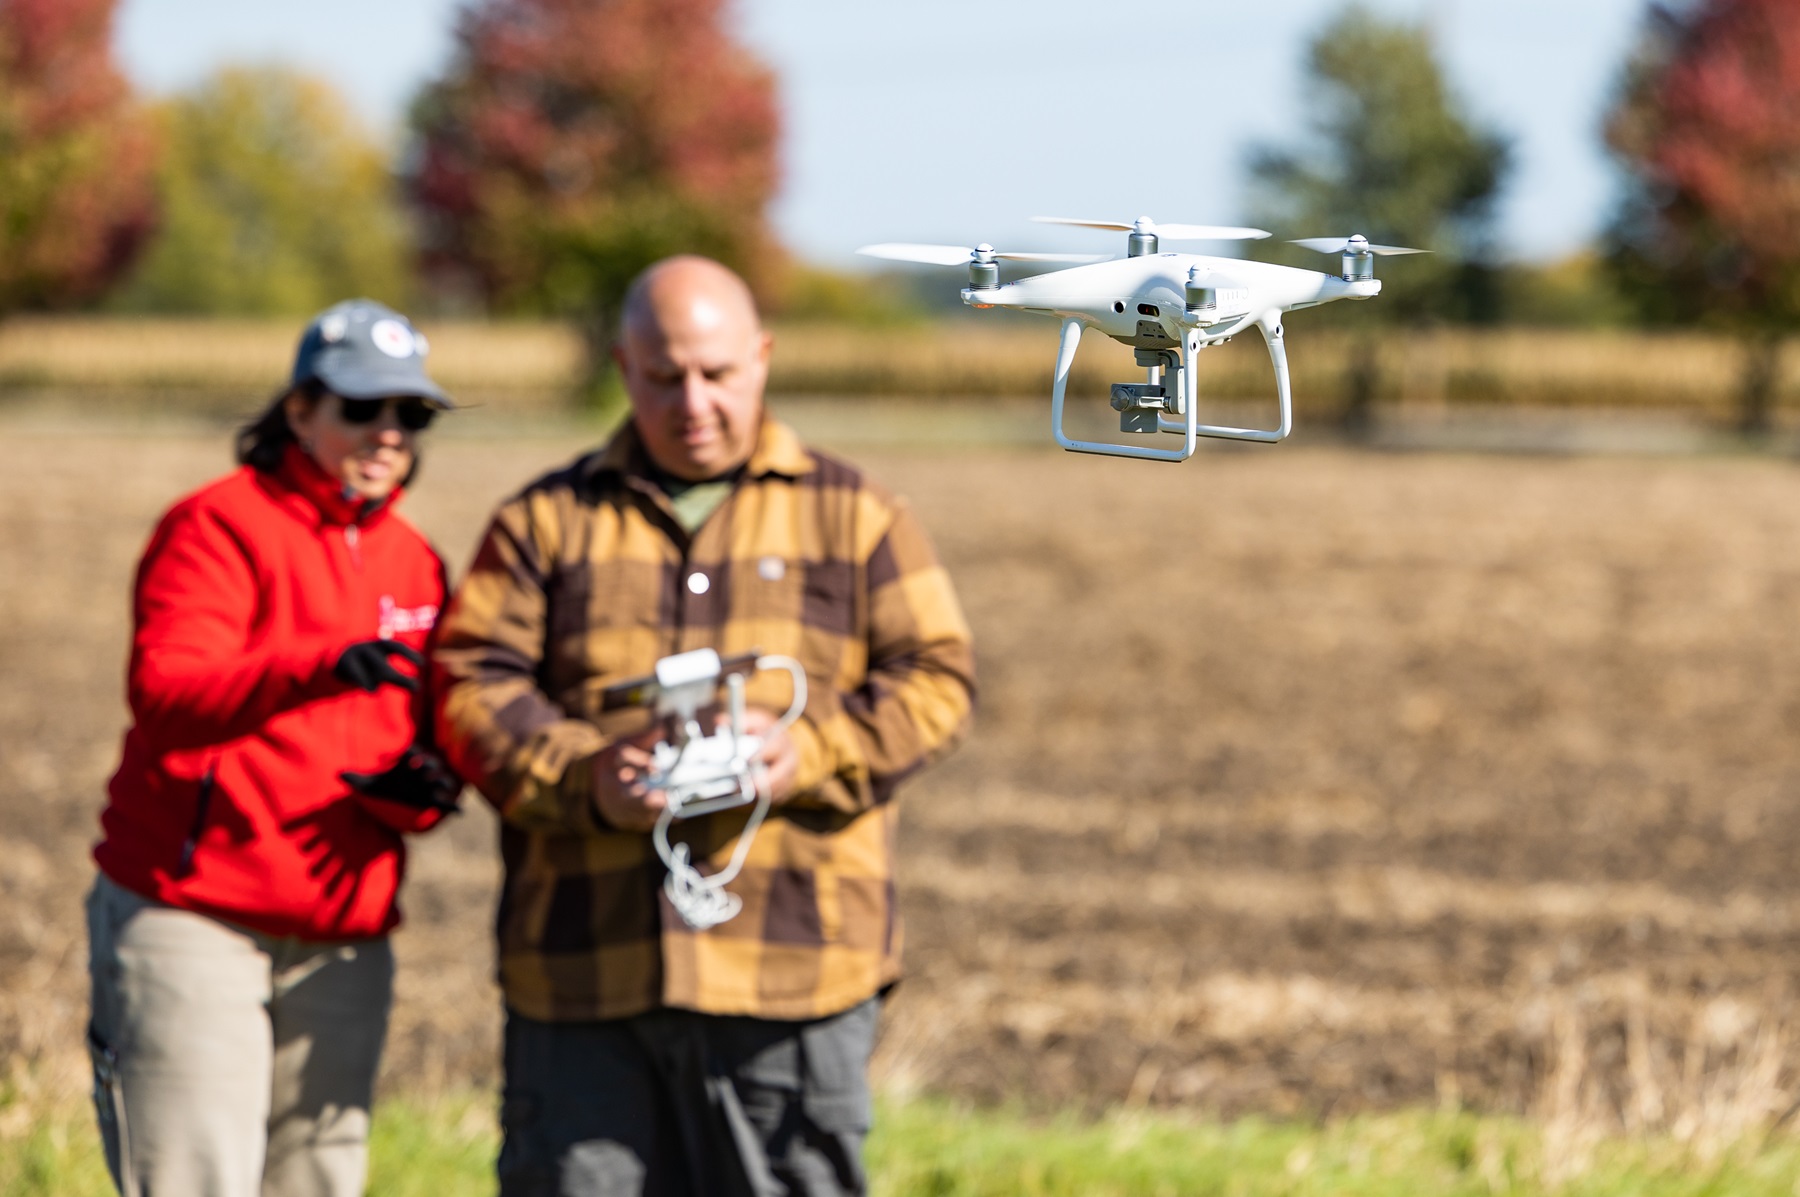 Harper will host its first Drone Exploration and Satefy Day on April 27